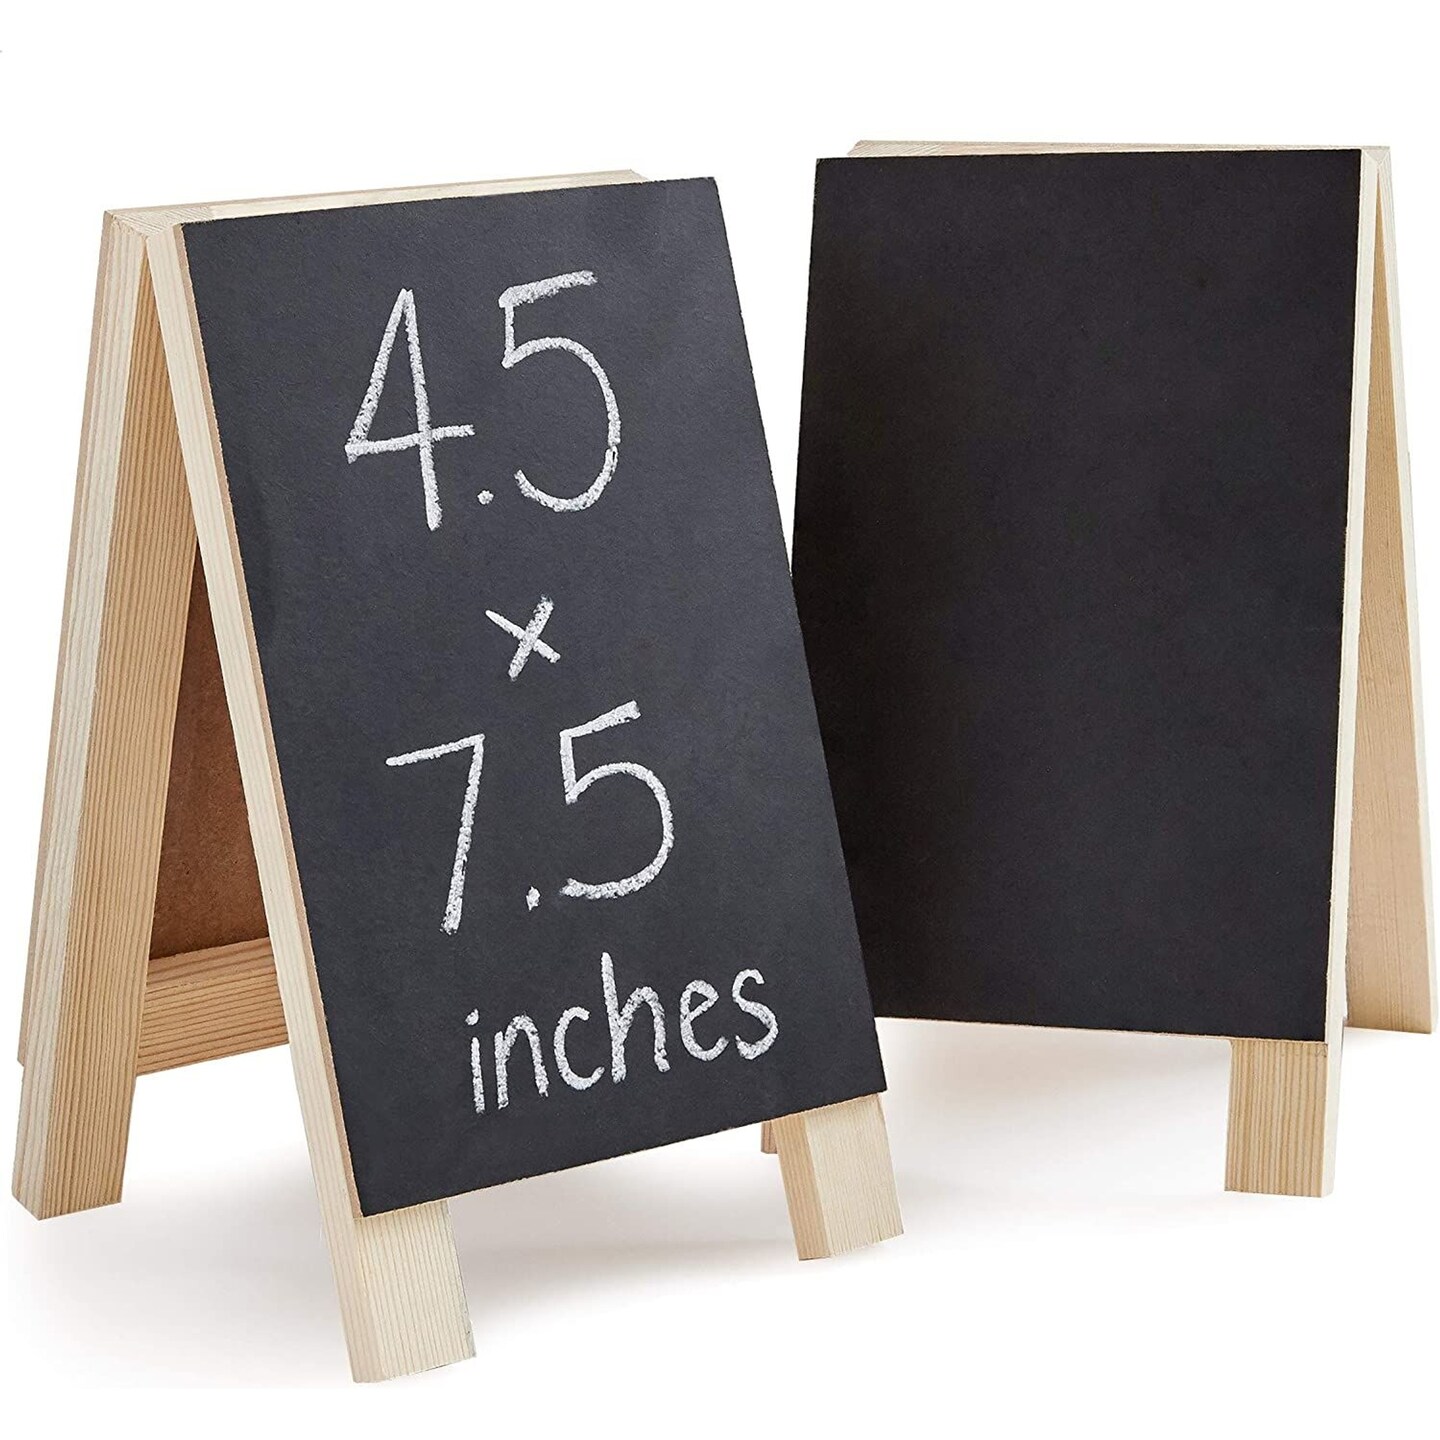 6-Pack Mini Chalkboard Signs with Easel Stand for Table Decorations,  Restaurant Food Display, Message Boards, Small Business, Wedding, Banquet,  Coffee